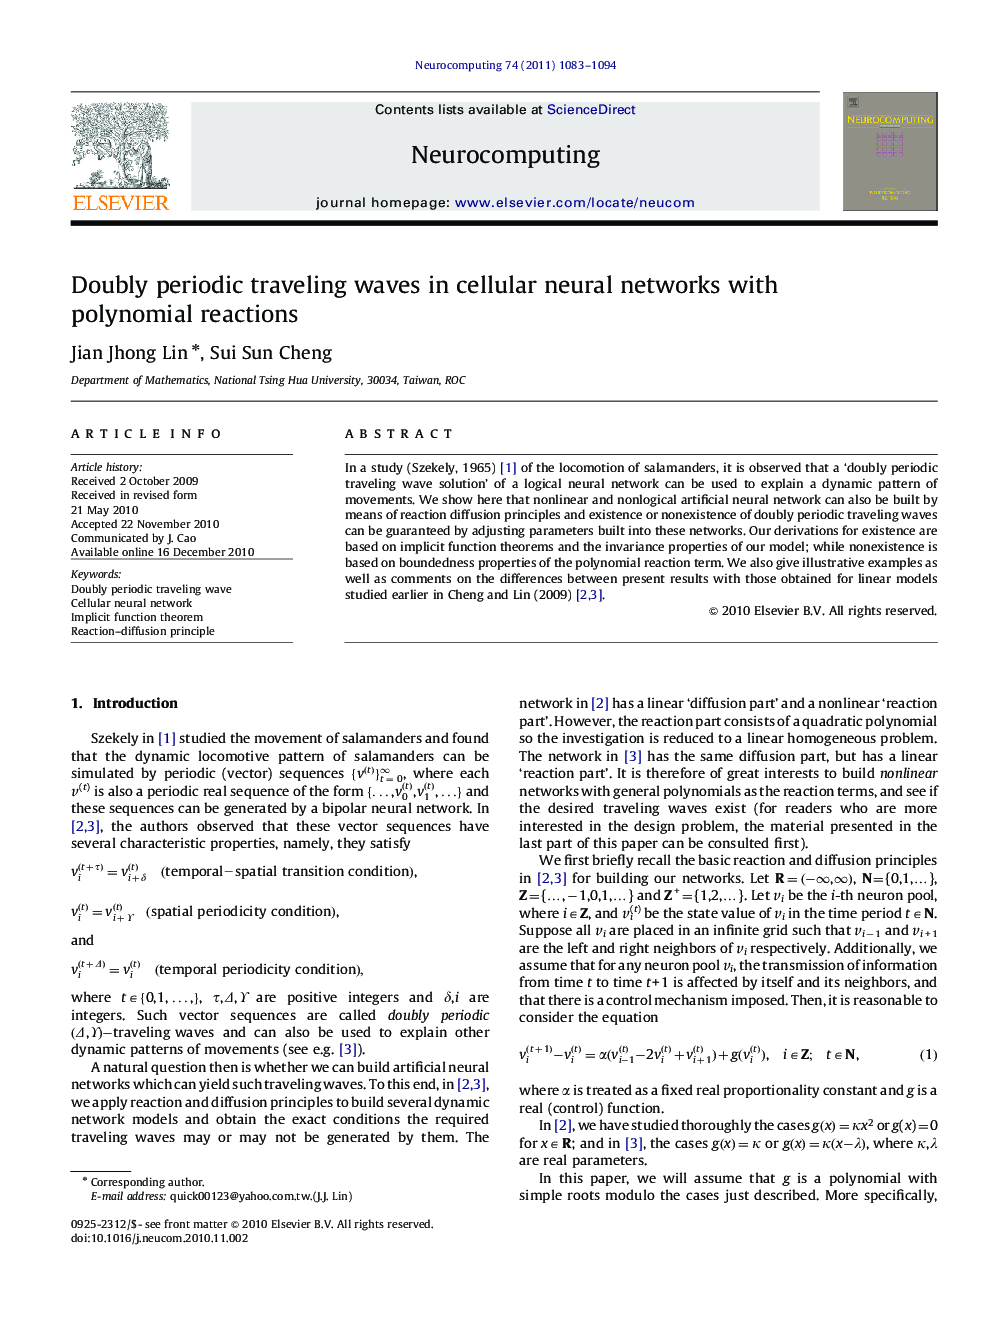 Doubly periodic traveling waves in cellular neural networks with polynomial reactions